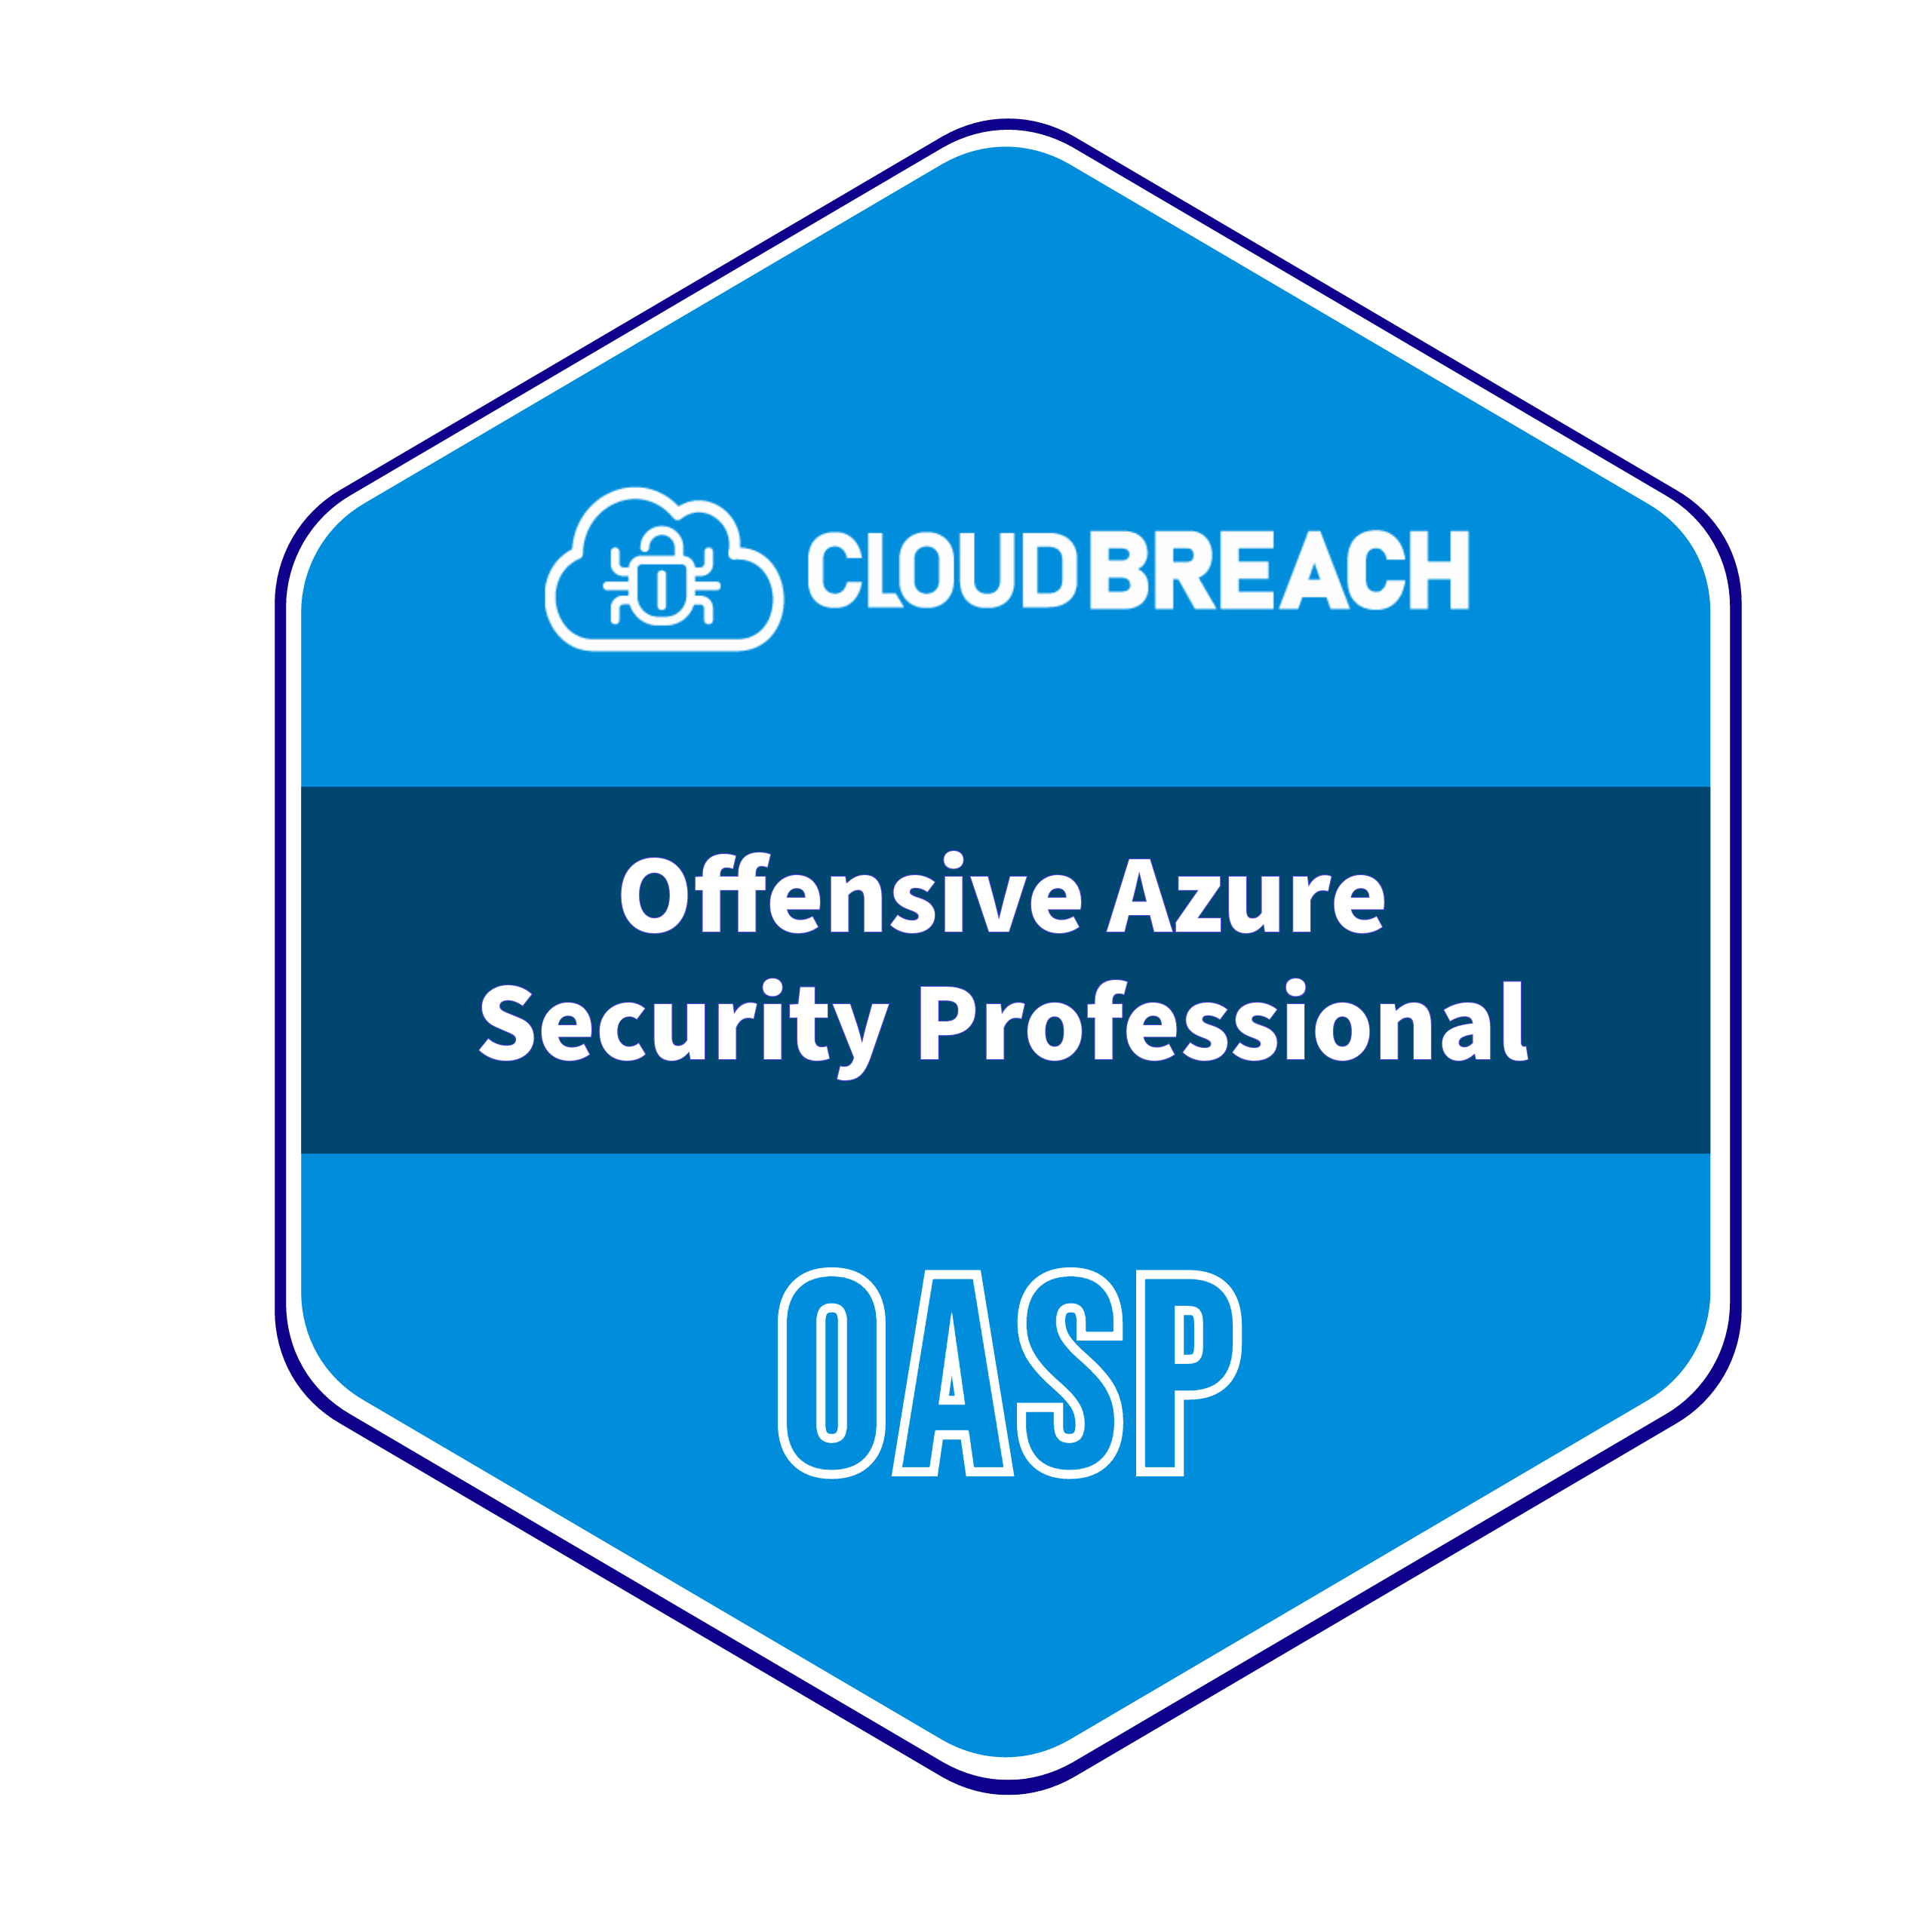 Offensive Azure Security Professional (OASP)